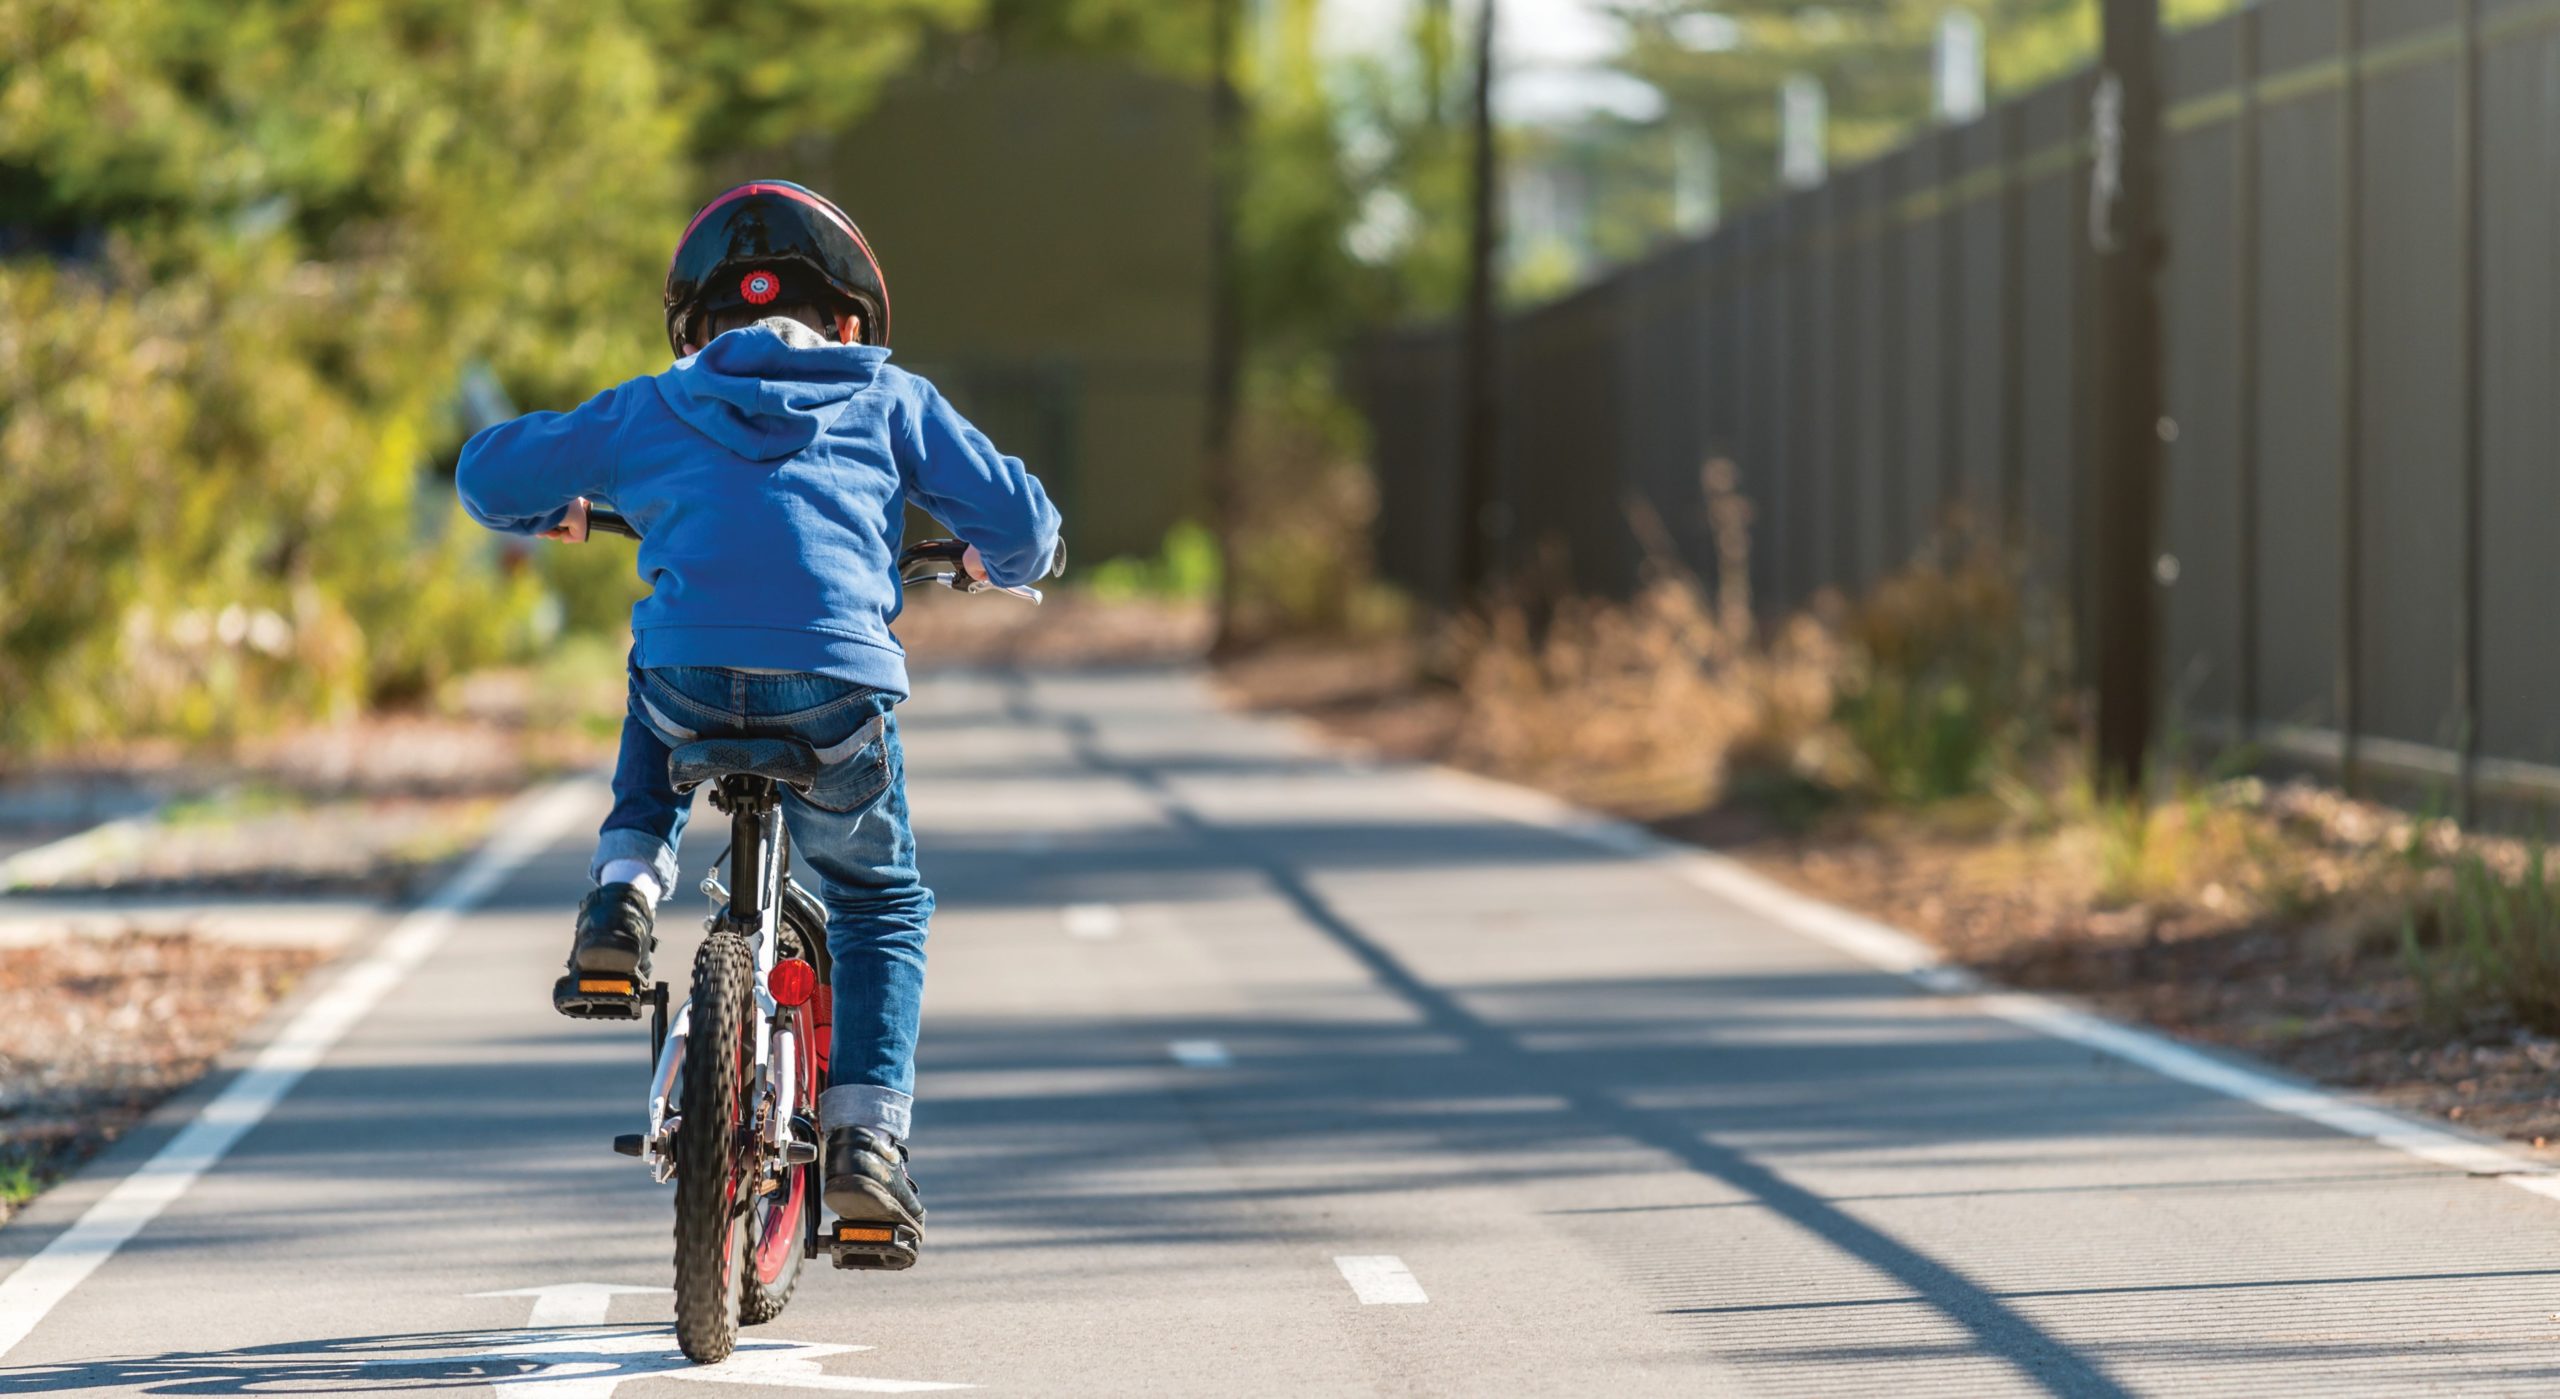 Young boy cycles safely on a dedicated bikeway.